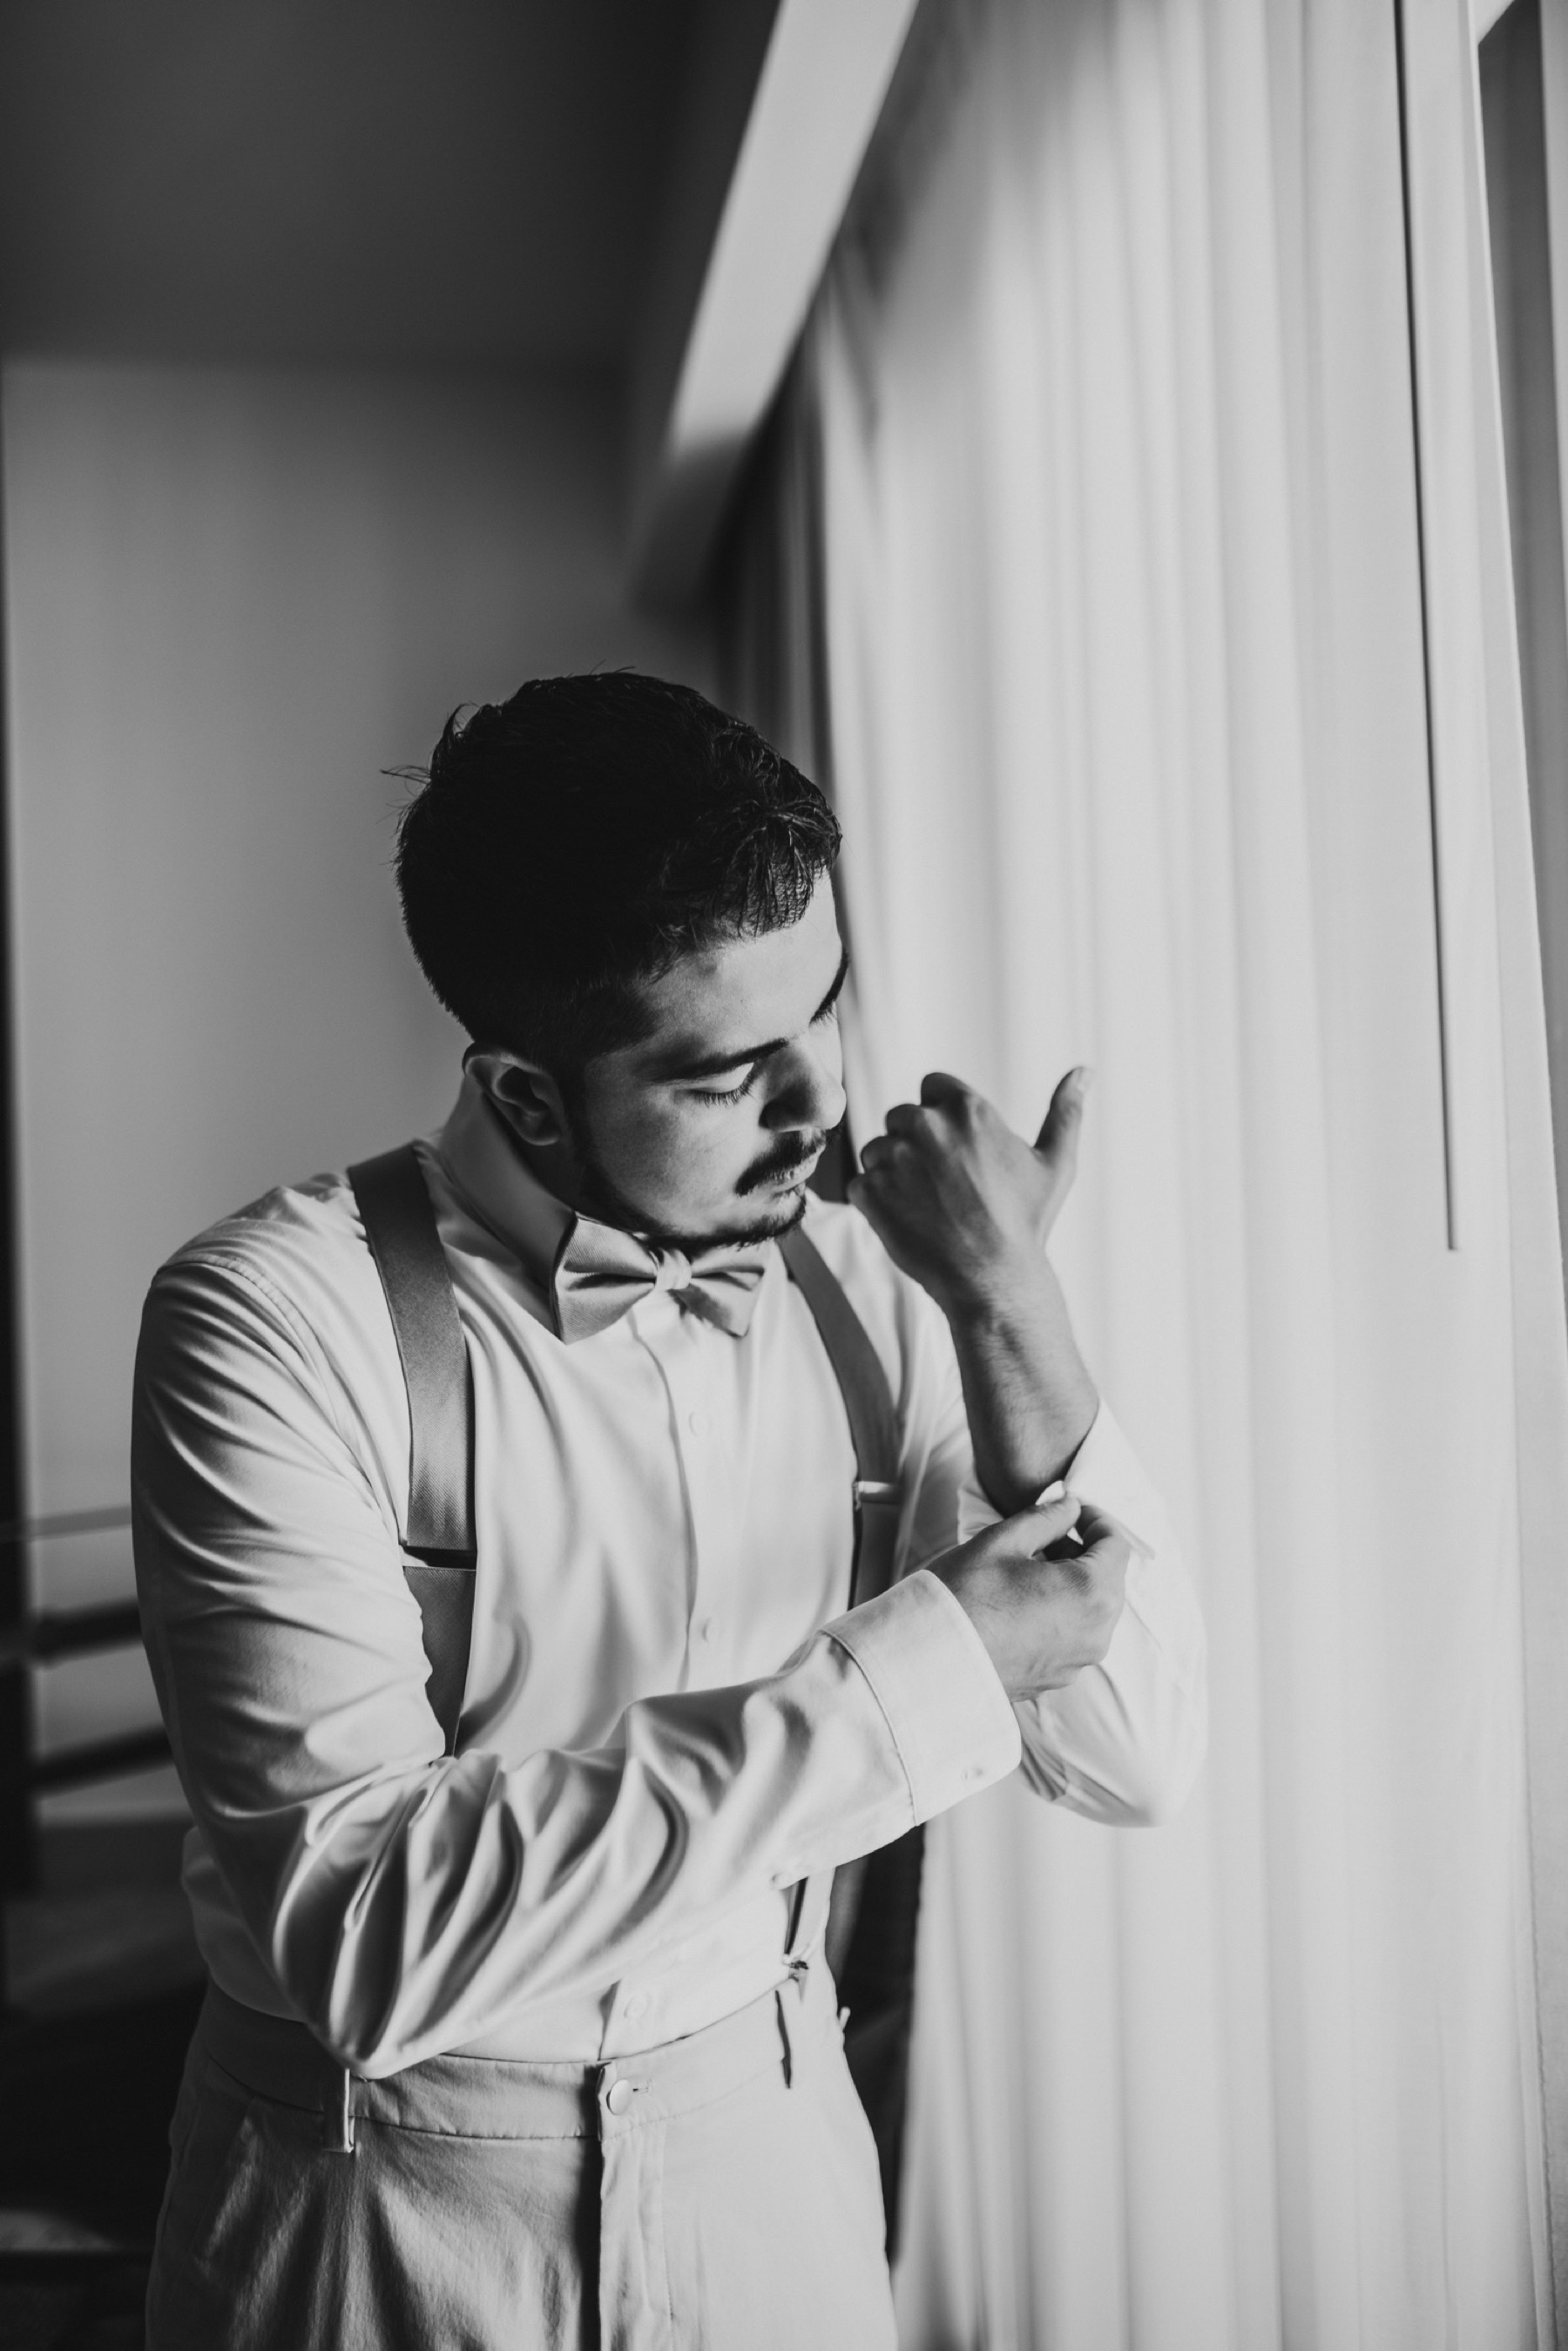 Black and white photo of a groom buttoning his sleeves on his shirt.